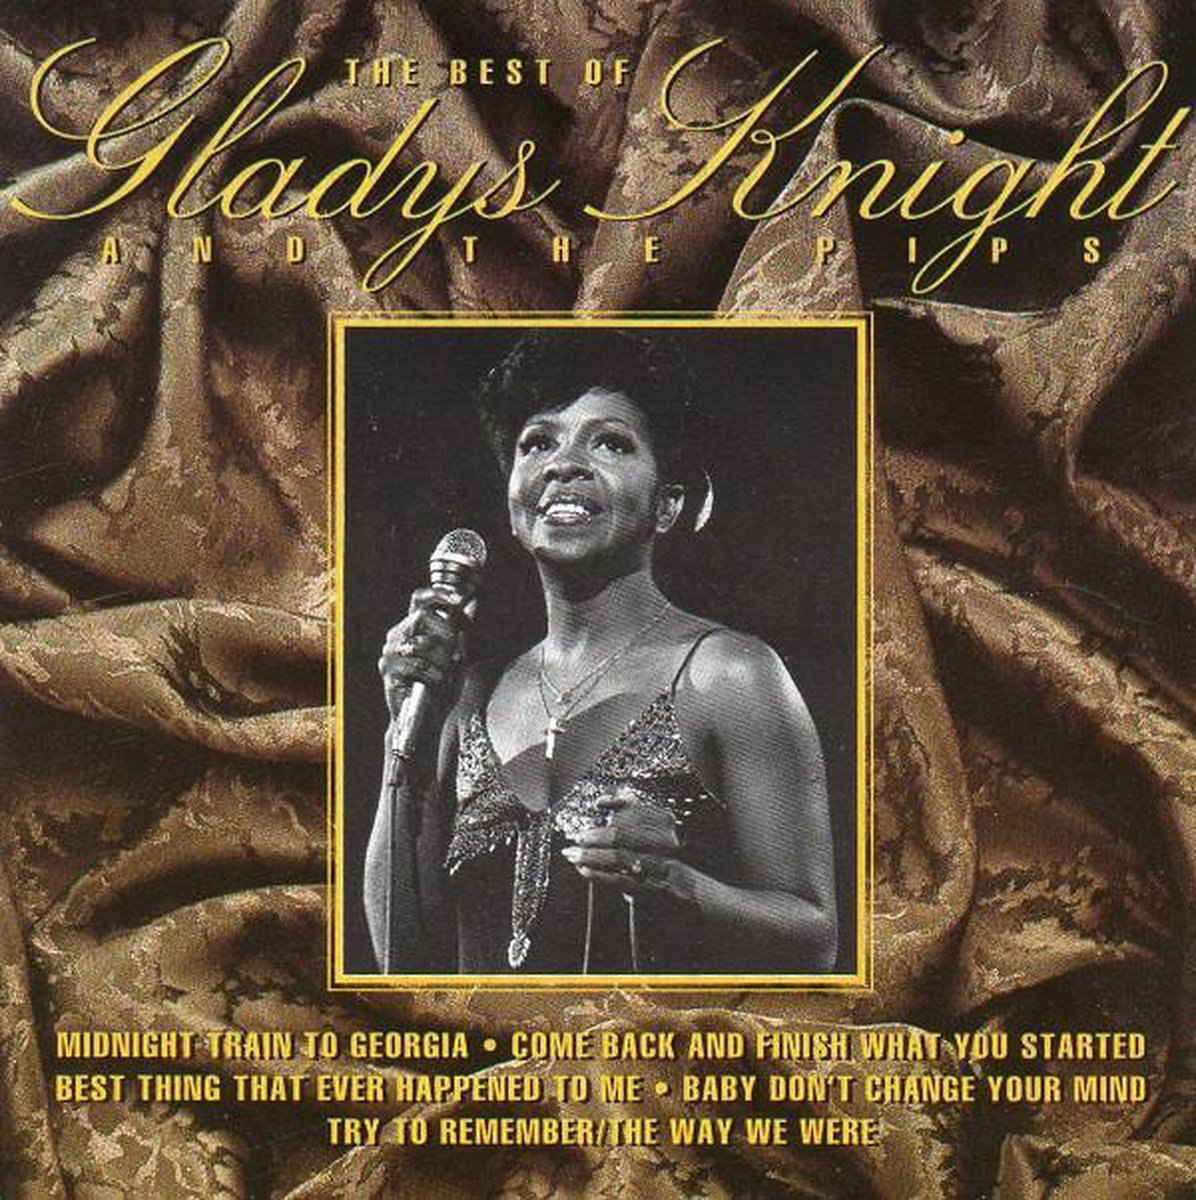 The Best Of Gladys Knight And The Pips - Gladys Knight